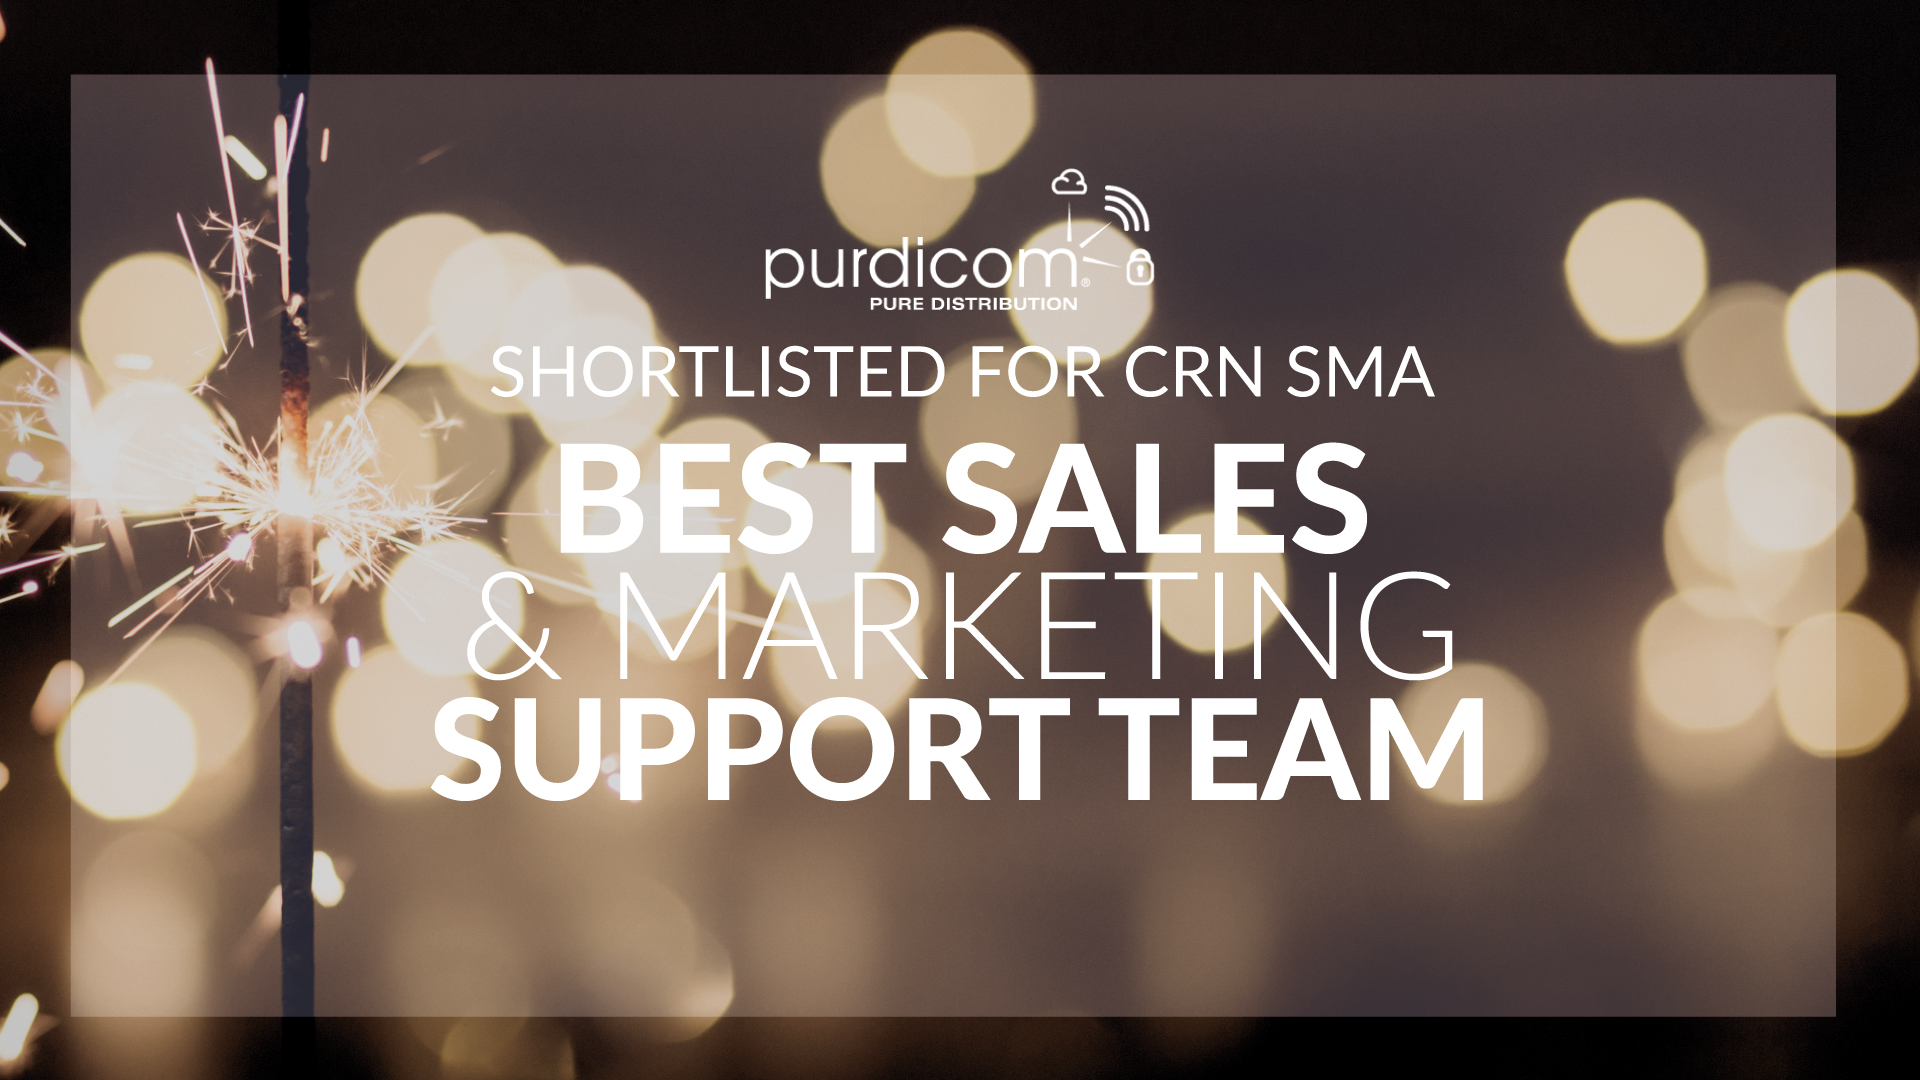 Purdicom shortlisted for CRN SMA ‘Best Sales & Marketing Support Team’